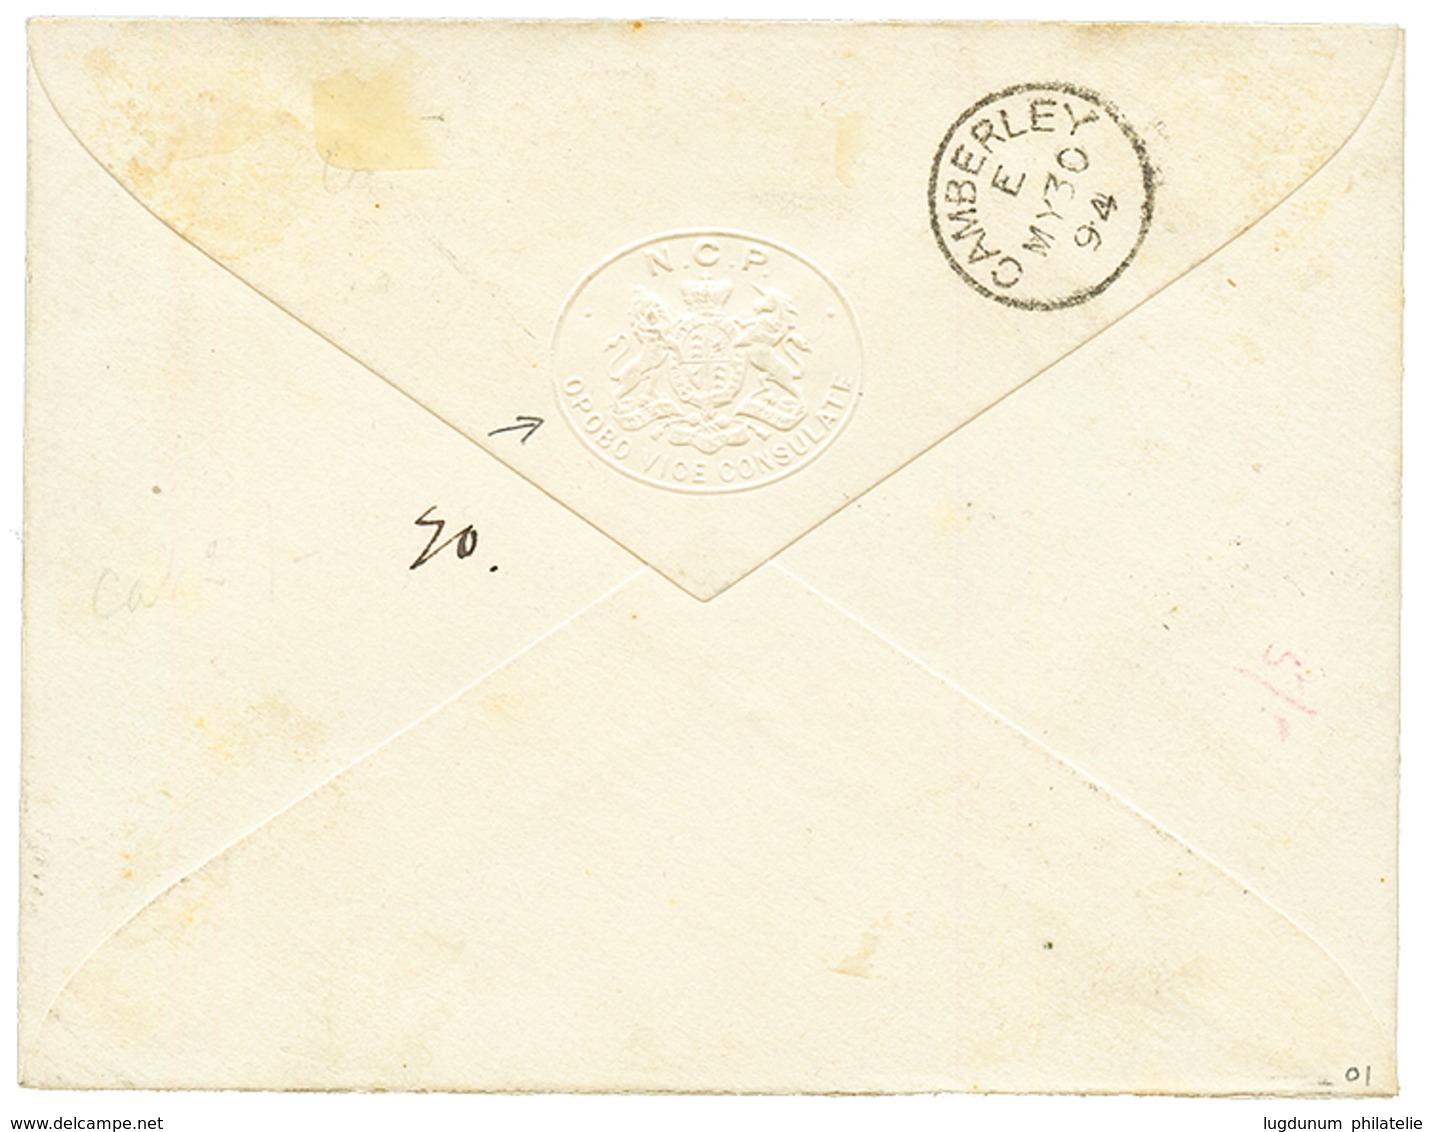 NIGER COAST - OPOBO CONSULATE : 1894 1/2d Strip Of 5 Canc. BONNY On Envelope (OPOBO VICE CONSULATE Seal On Reverse) To E - Nigeria (...-1960)